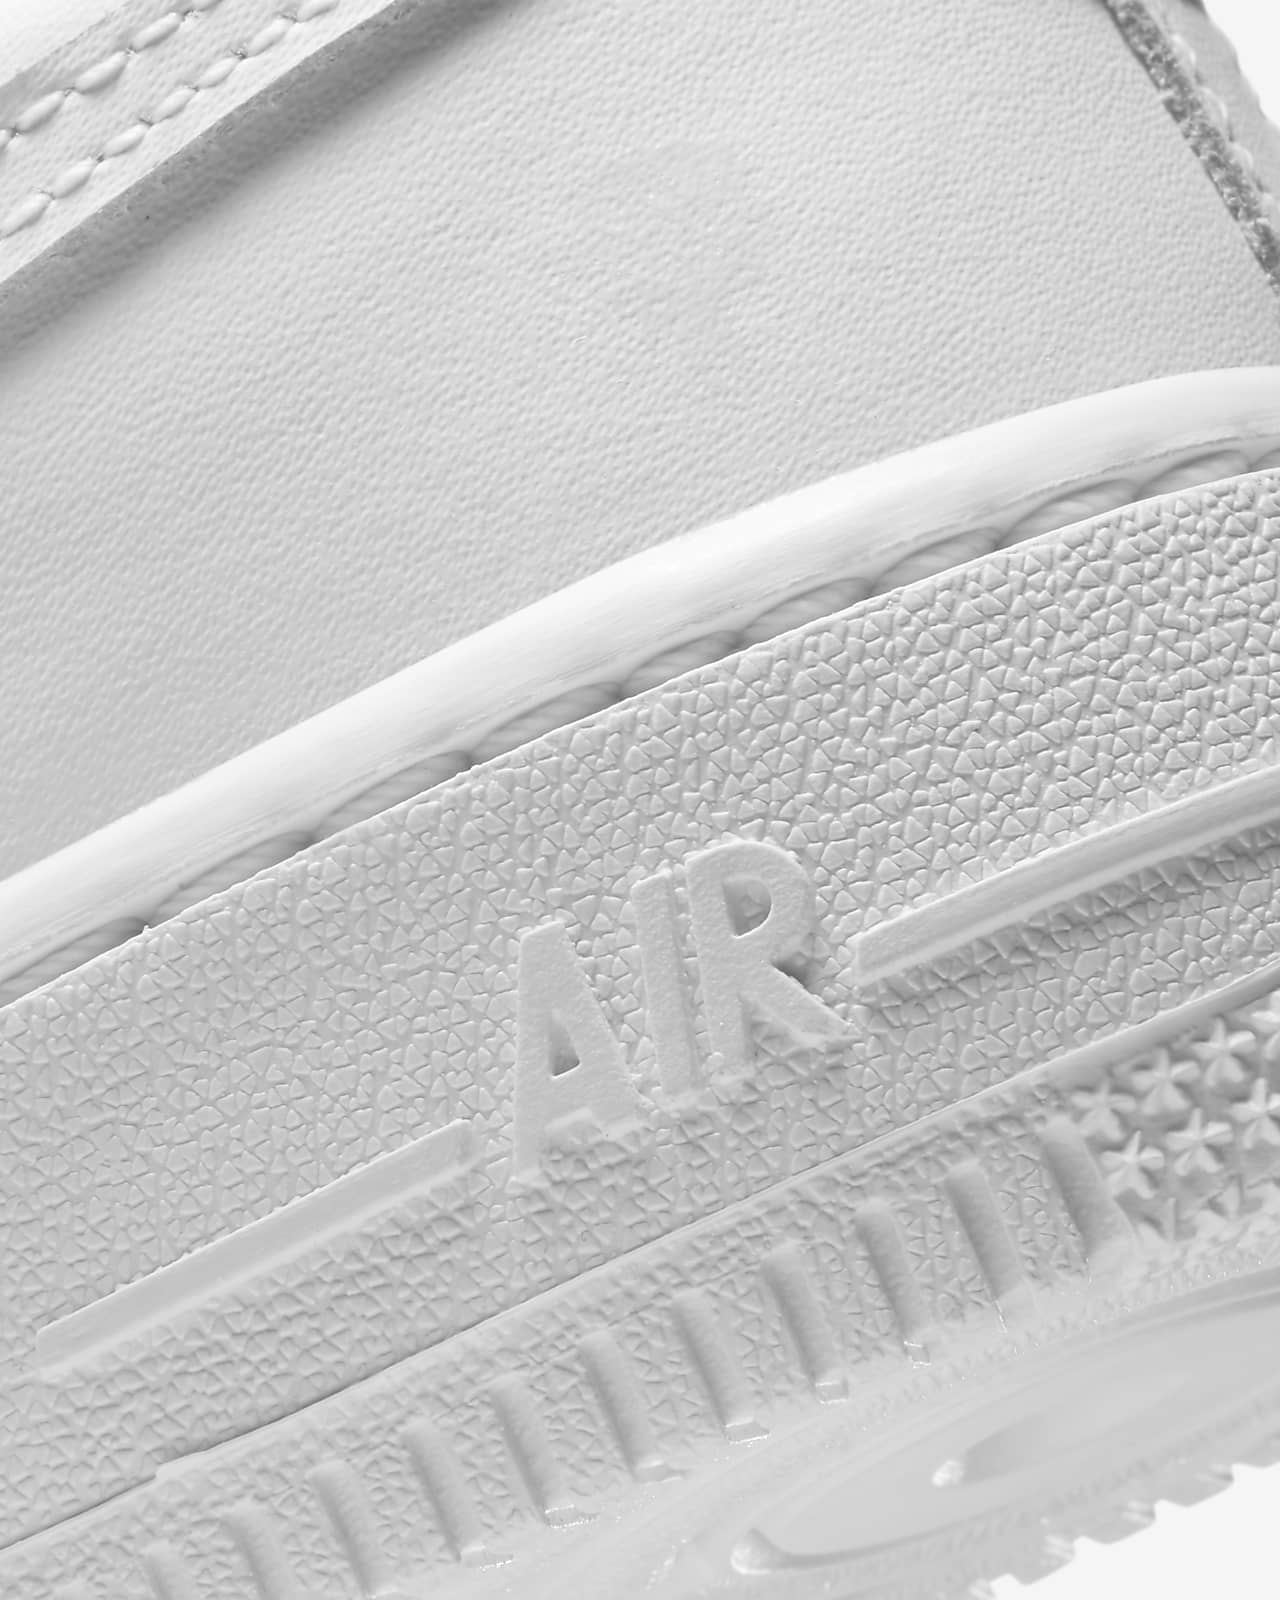 nike air force 1 youth 5 white